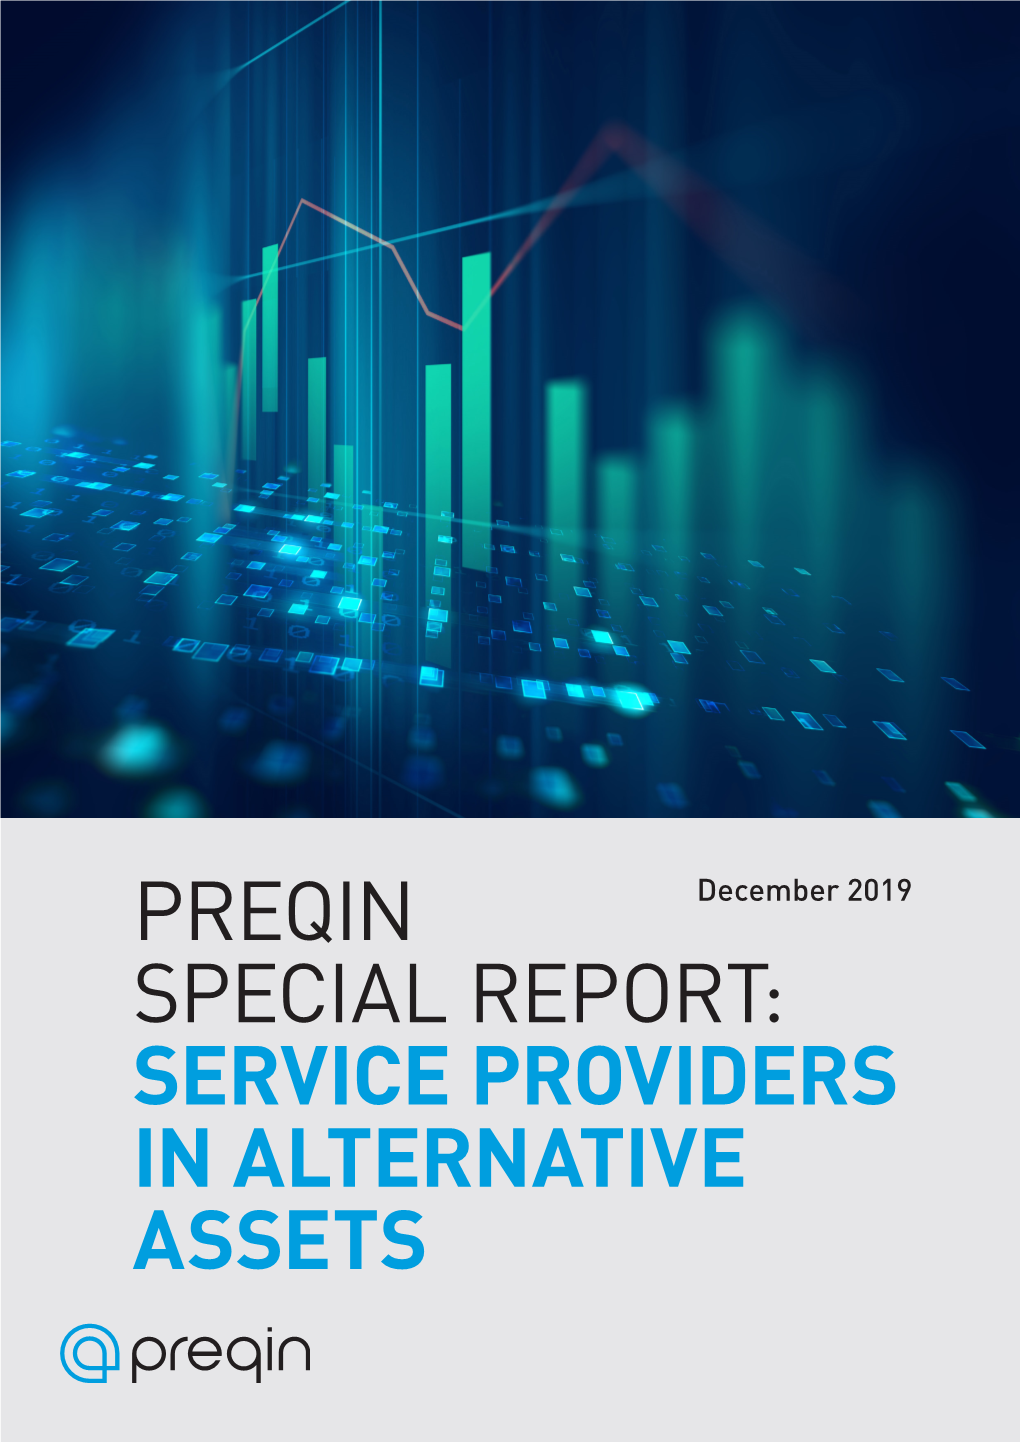 PREQIN SPECIAL REPORT: SERVICE PROVIDERS in ALTERNATIVE ASSETS Contents